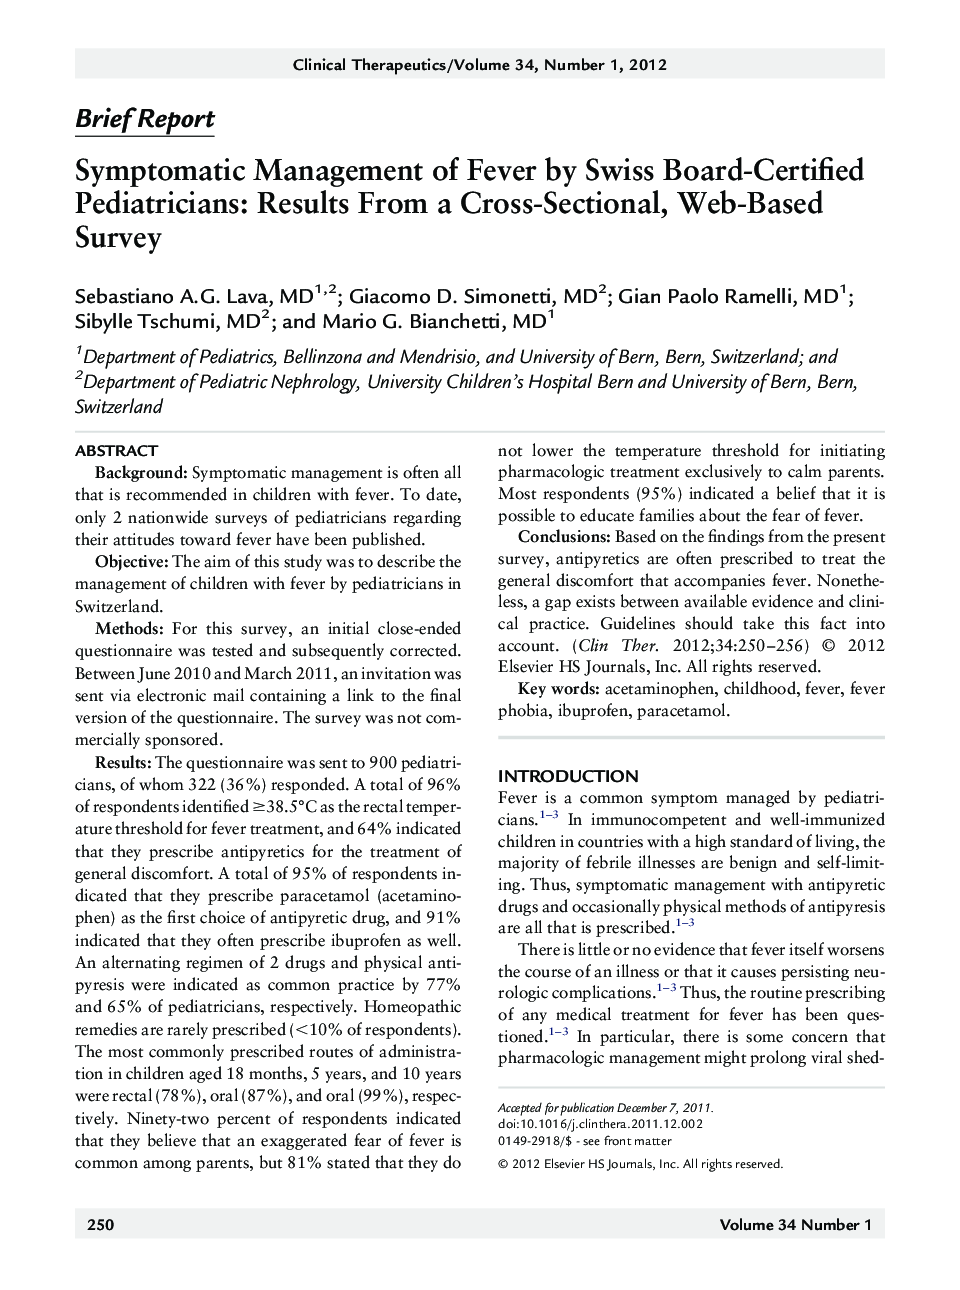 Symptomatic Management of Fever by Swiss Board-Certified Pediatricians: Results From a Cross-Sectional, Web-Based Survey